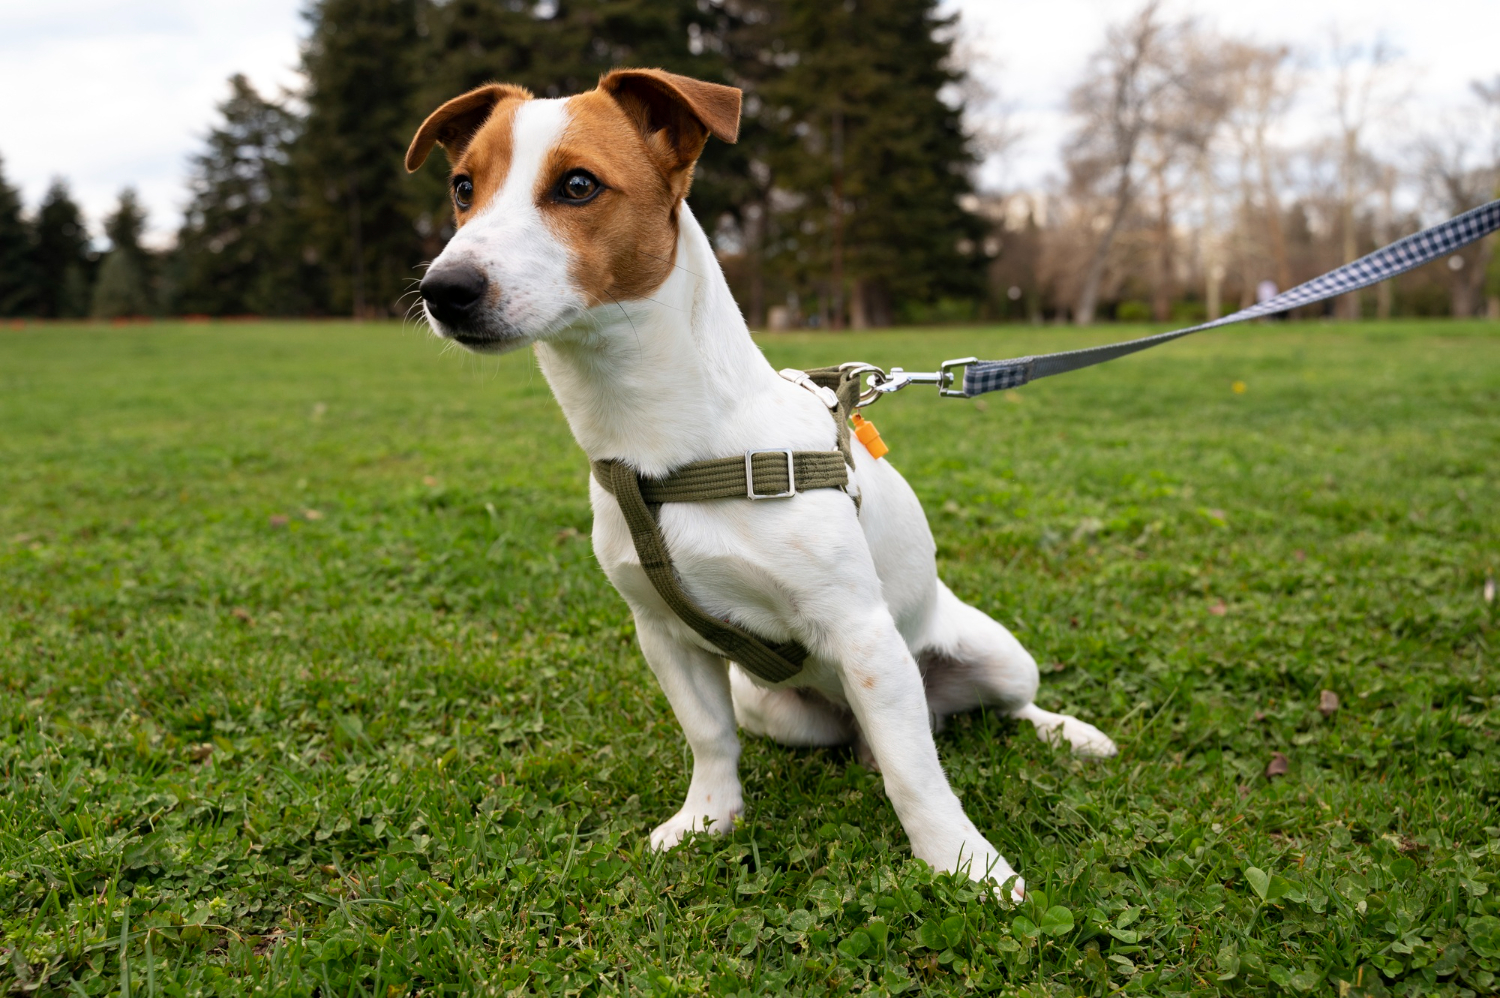 A Step-by-Step Guide on How to Measure a Dog for a Harness